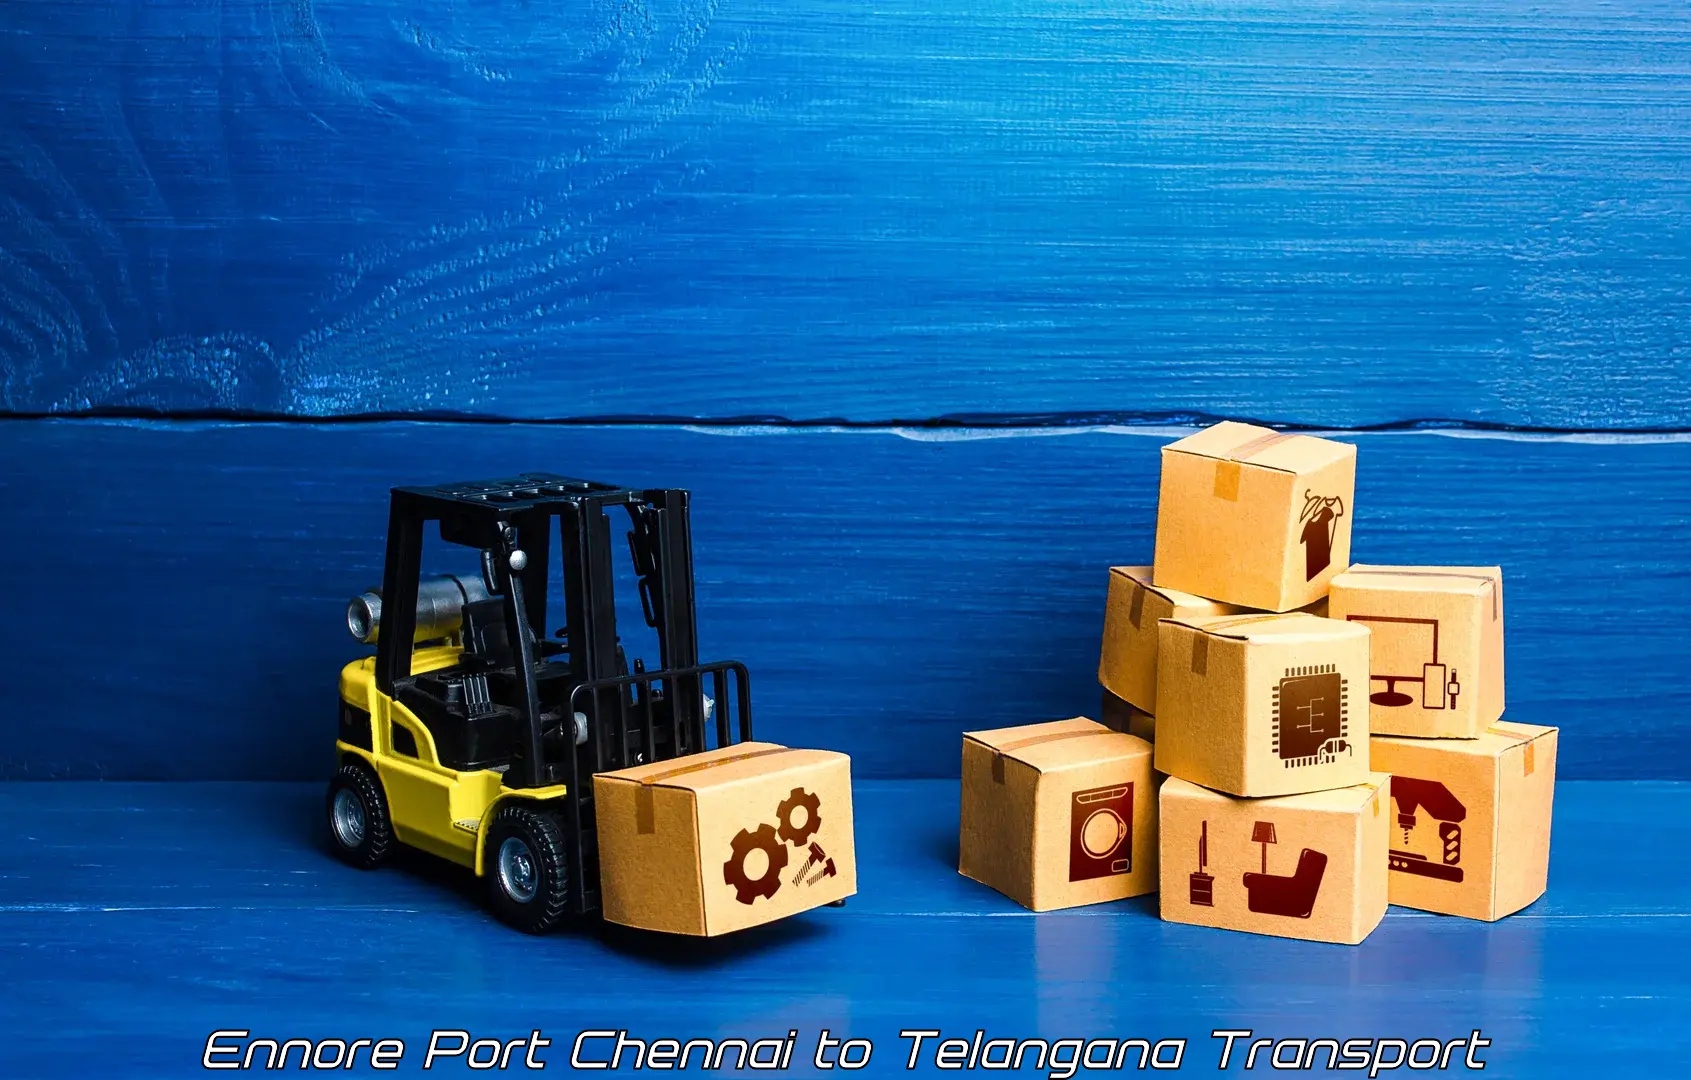 Online transport service Ennore Port Chennai to Amangal